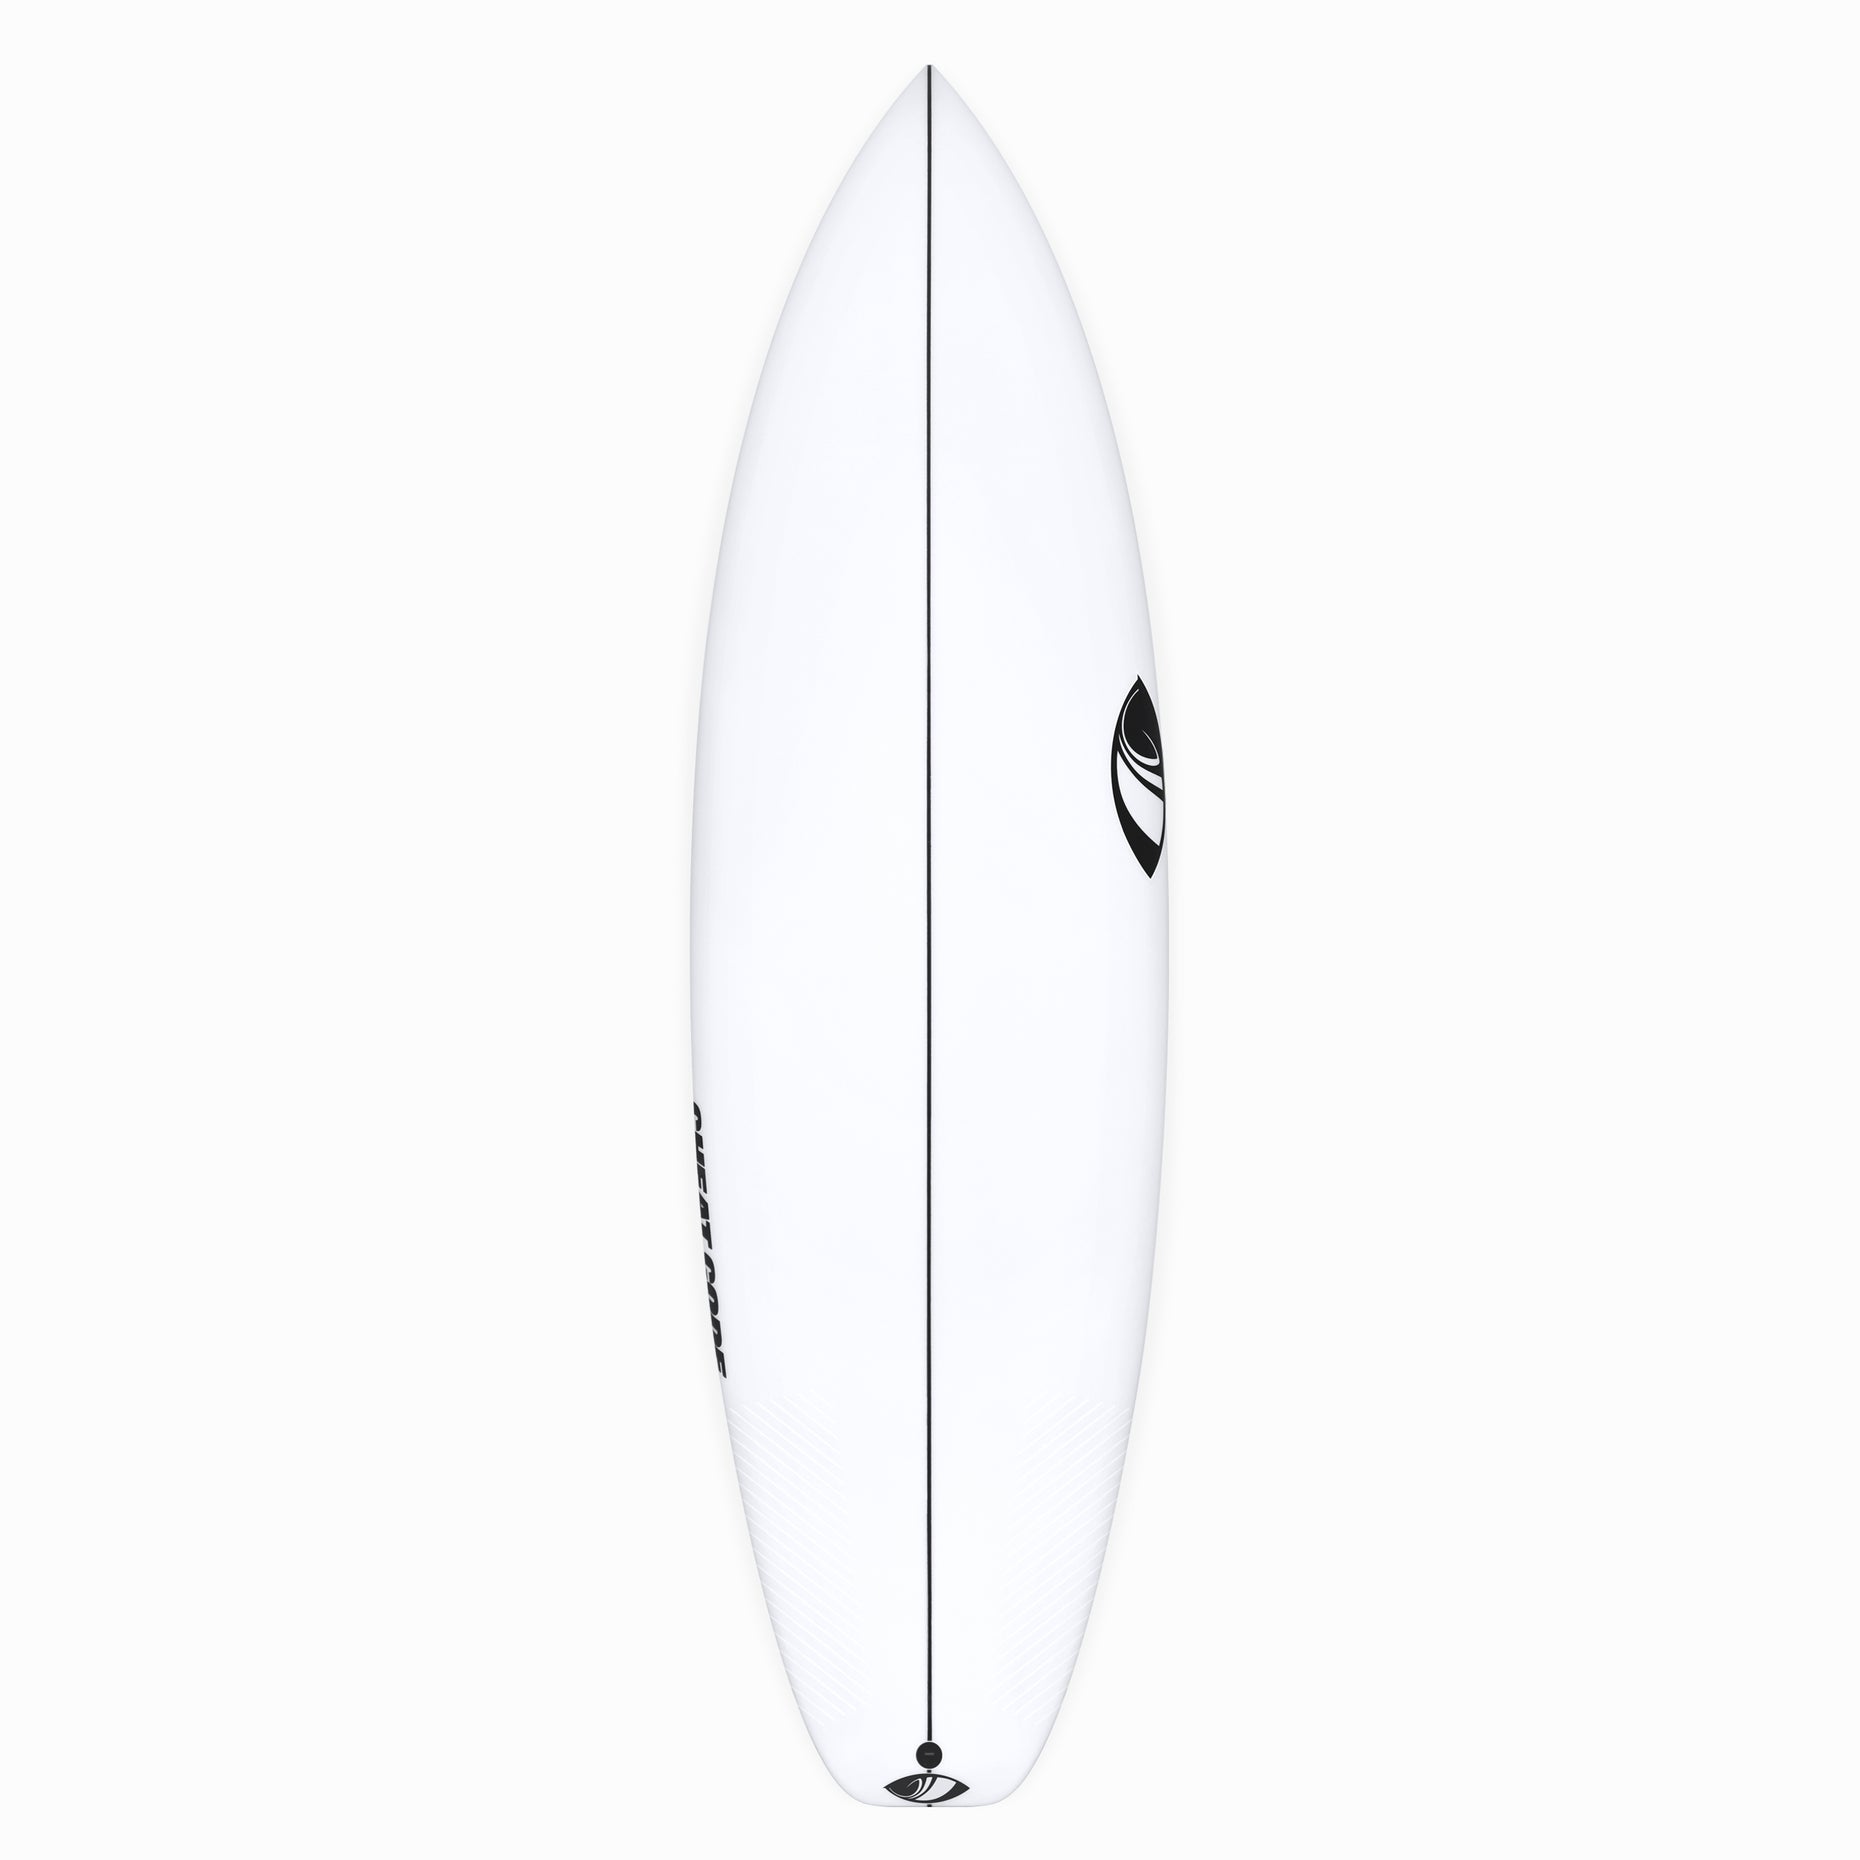 No Other Way Color Surfboard Flat